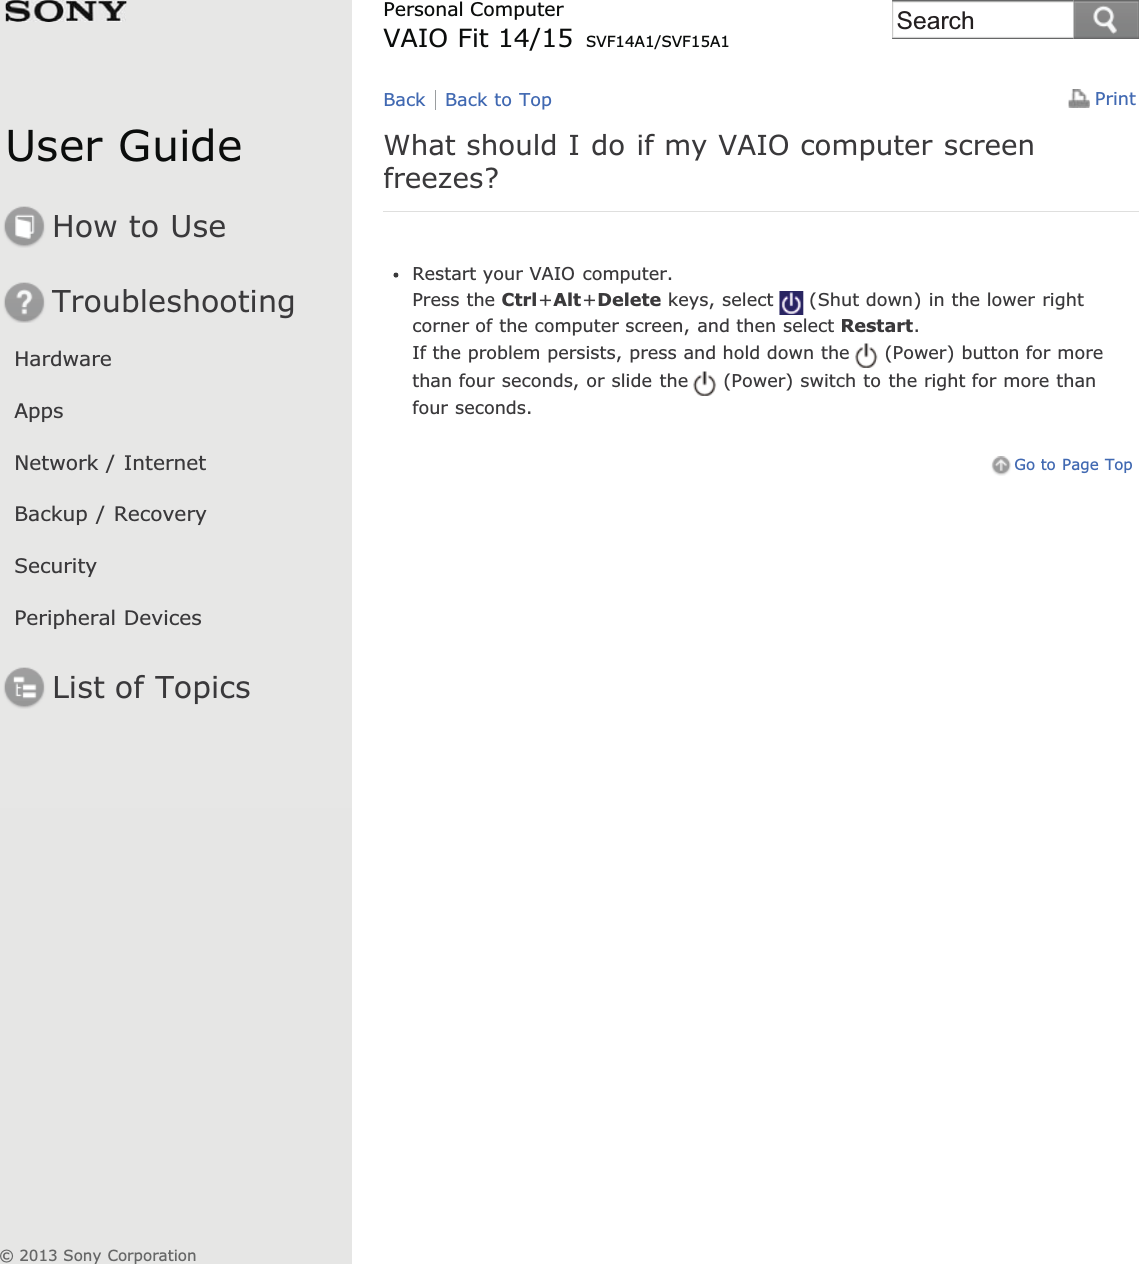 User GuideHow to UseTroubleshootingHardwareAppsNetwork / InternetBackup / RecoverySecurityPeripheral DevicesList of TopicsPrintPersonal ComputerVAIO Fit 14/15 SVF14A1/SVF15A1What should I do if my VAIO computer screenfreezes?Restart your VAIO computer.Press the Ctrl+Alt+Delete keys, select (Shut down) in the lower rightcorner of the computer screen, and then select Restart.If the problem persists, press and hold down the (Power) button for morethan four seconds, or slide the (Power) switch to the right for more thanfour seconds.Go to Page TopBack Back to Top© 2013 Sony CorporationSearch